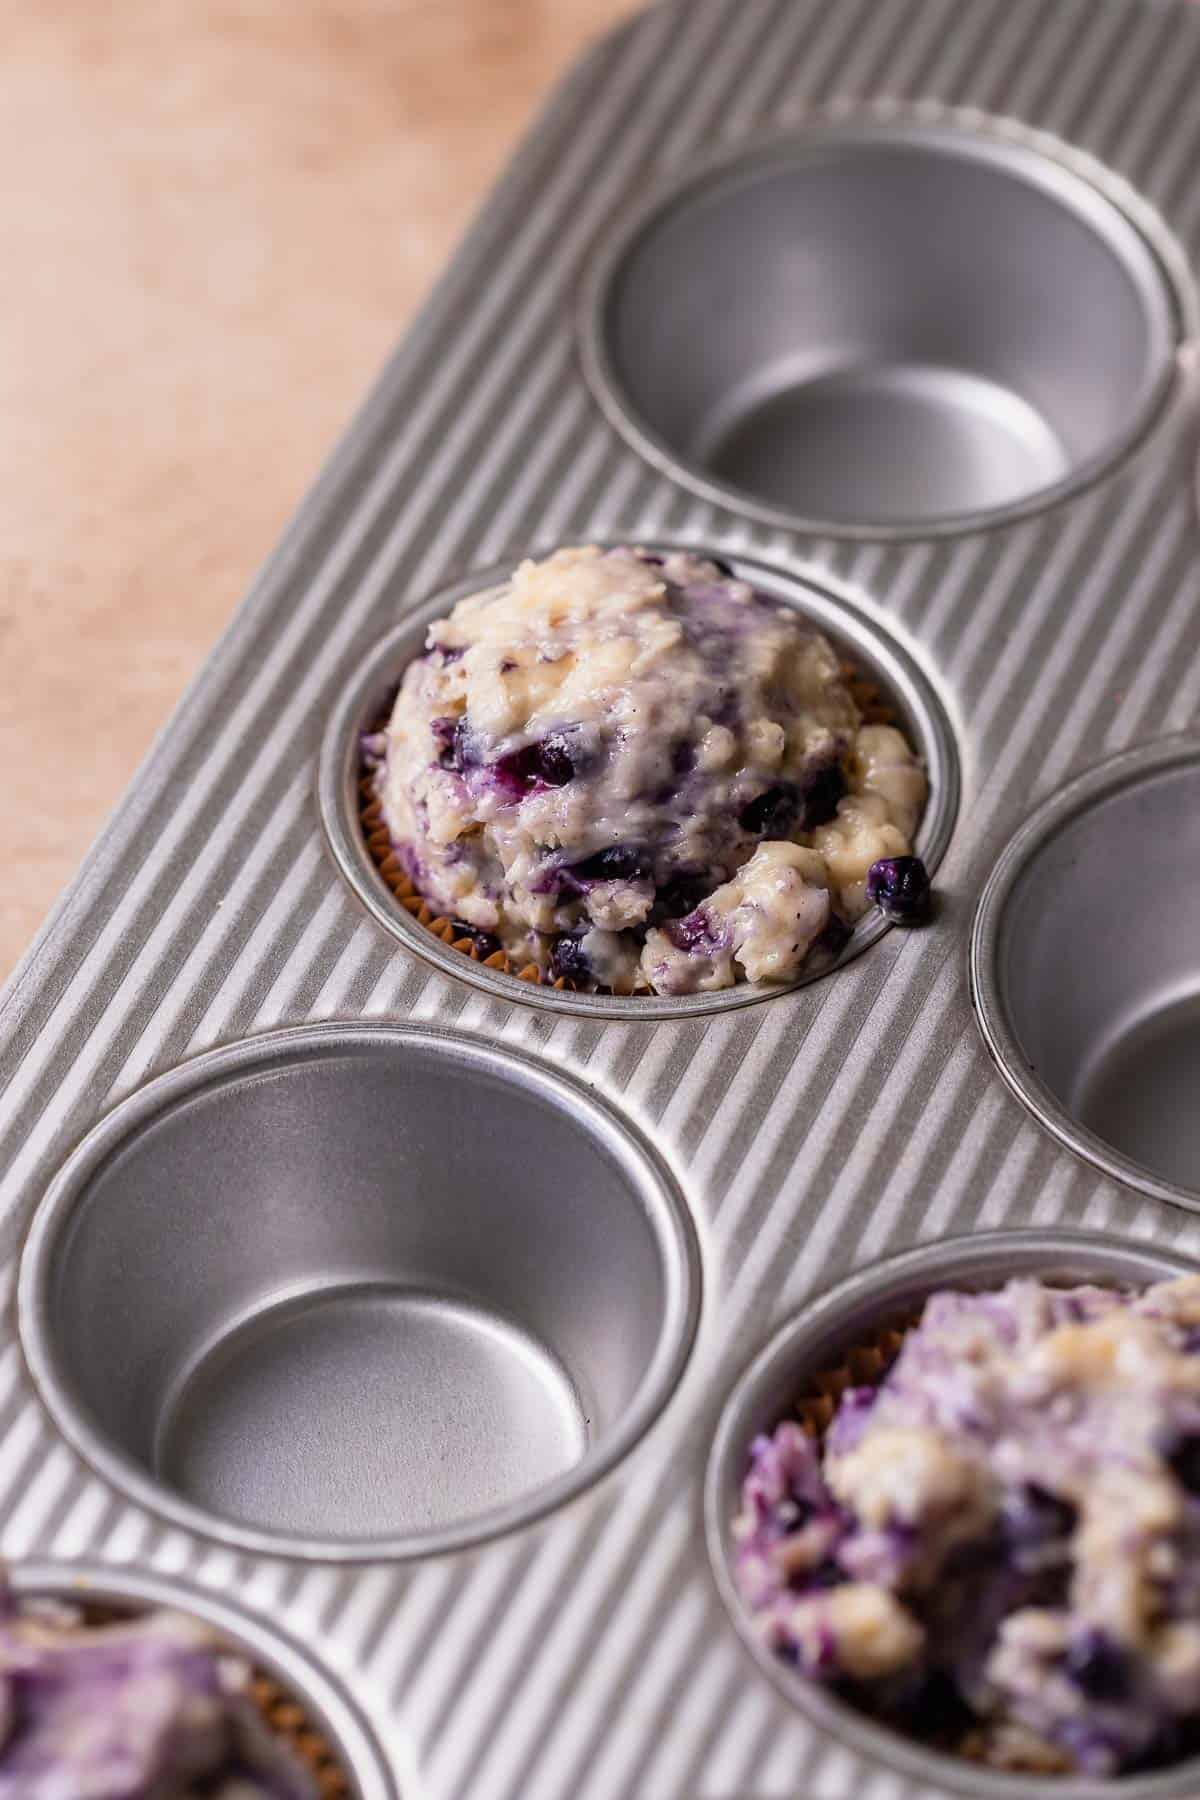 A muffin pan lined with liners and filled with blueberry muffin batter.